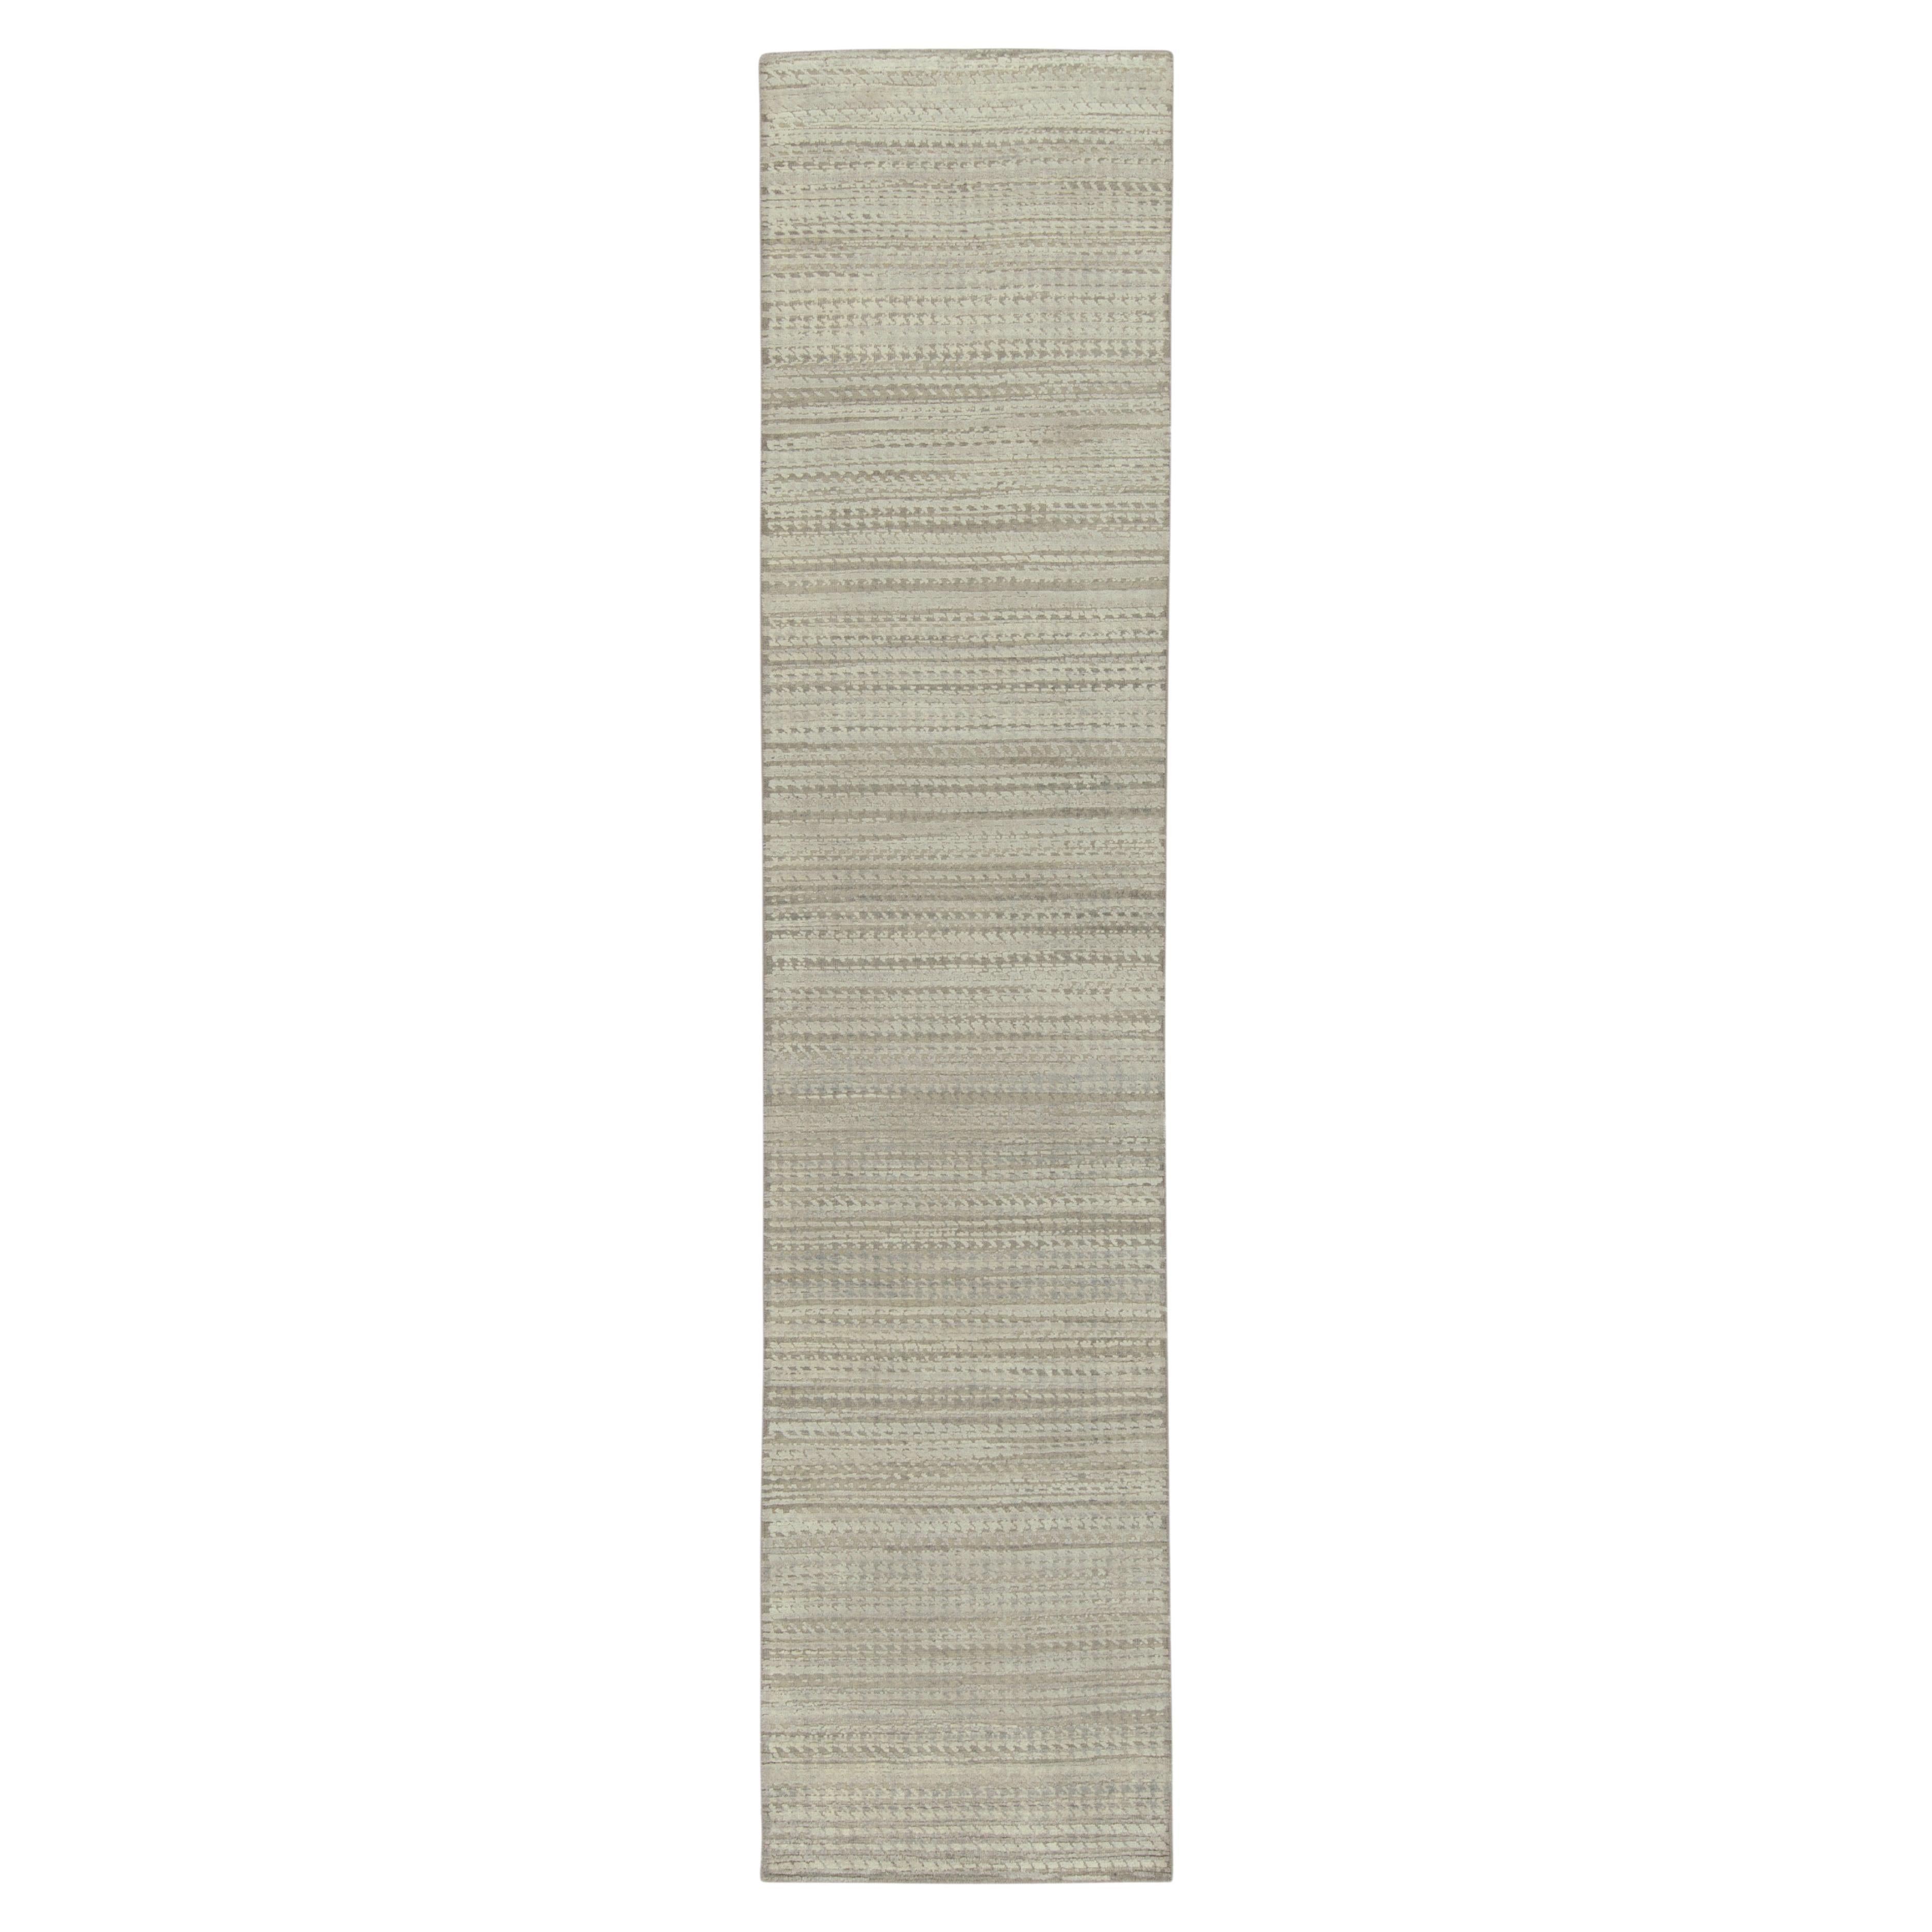 Rug & Kilim’s Contemporary runner in Gray & White High-Low Geometric Pattern For Sale